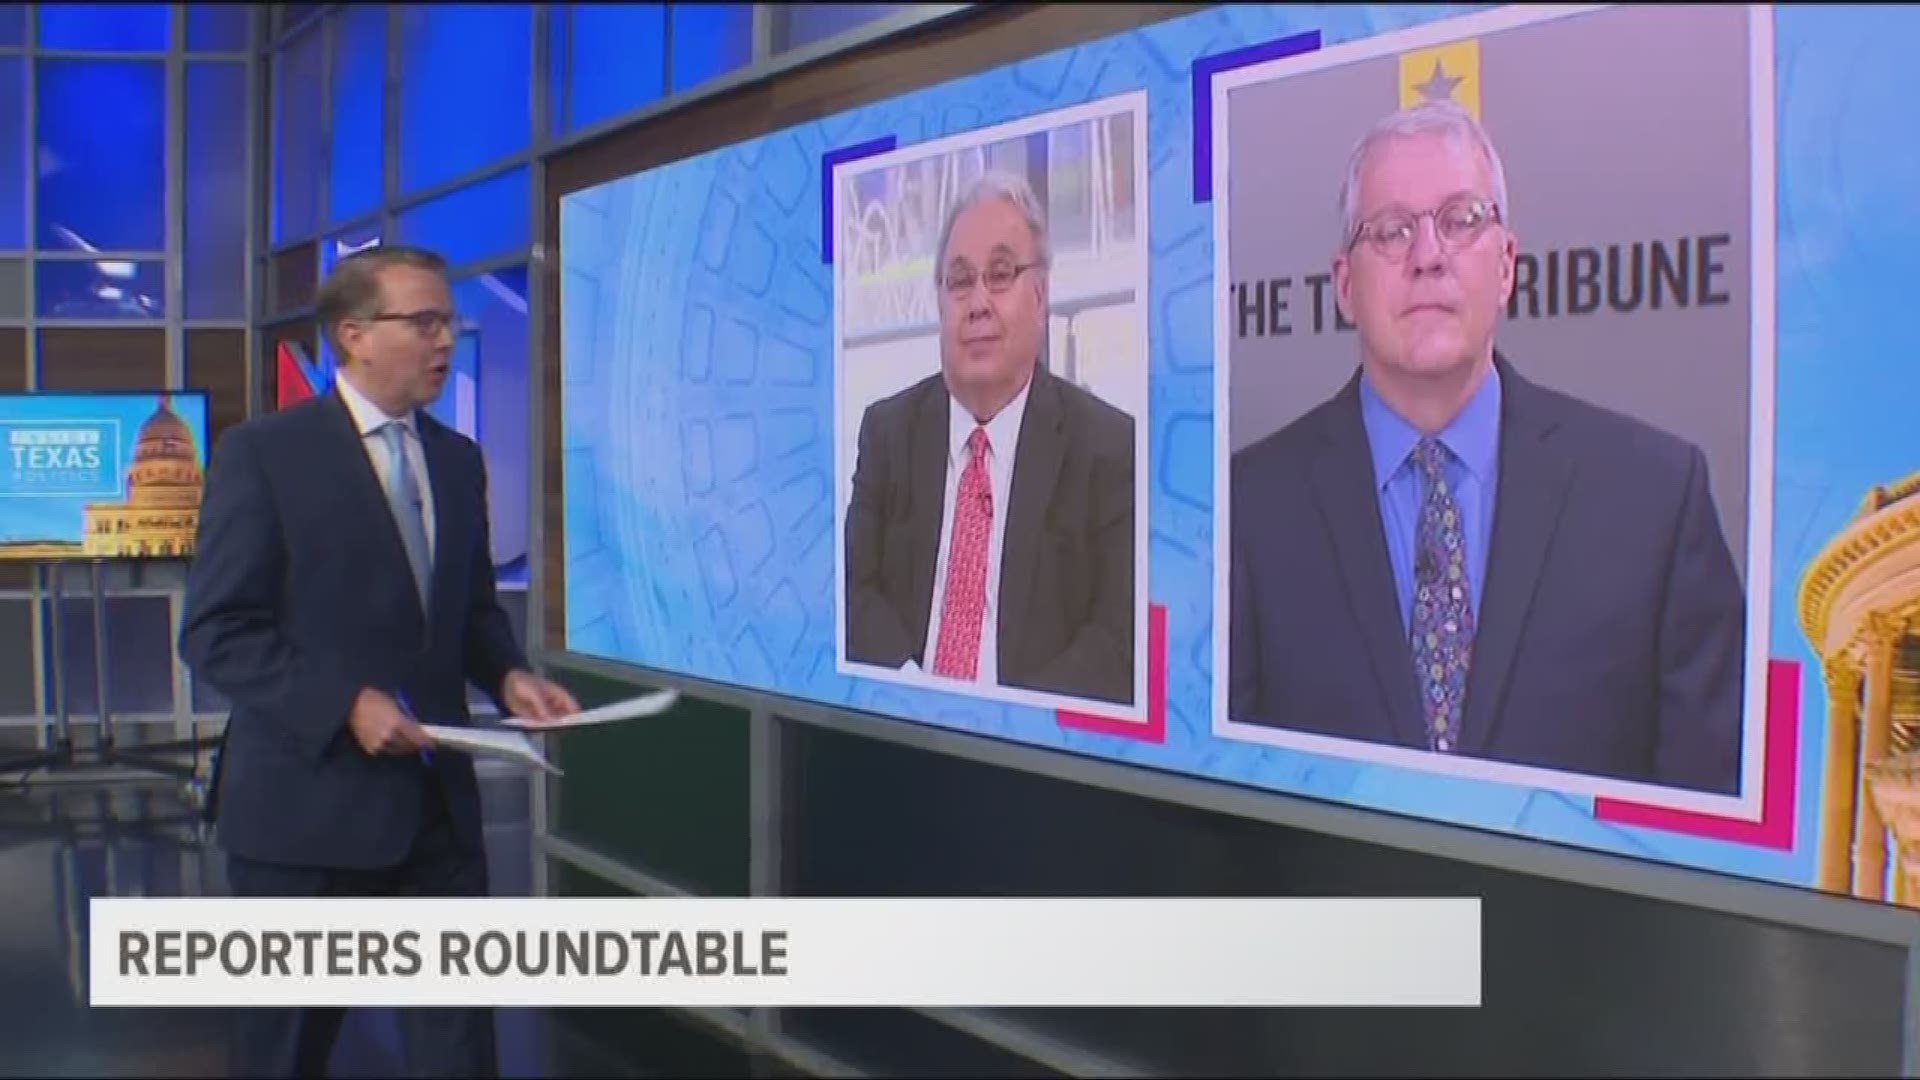 Reporters Roundtable puts the headlines in perspective each week. Ross Ramsey and Bud Kennedy joined host Jason Whitely. Berna Dean Steptoe, WFAA’s political producer was off this week.